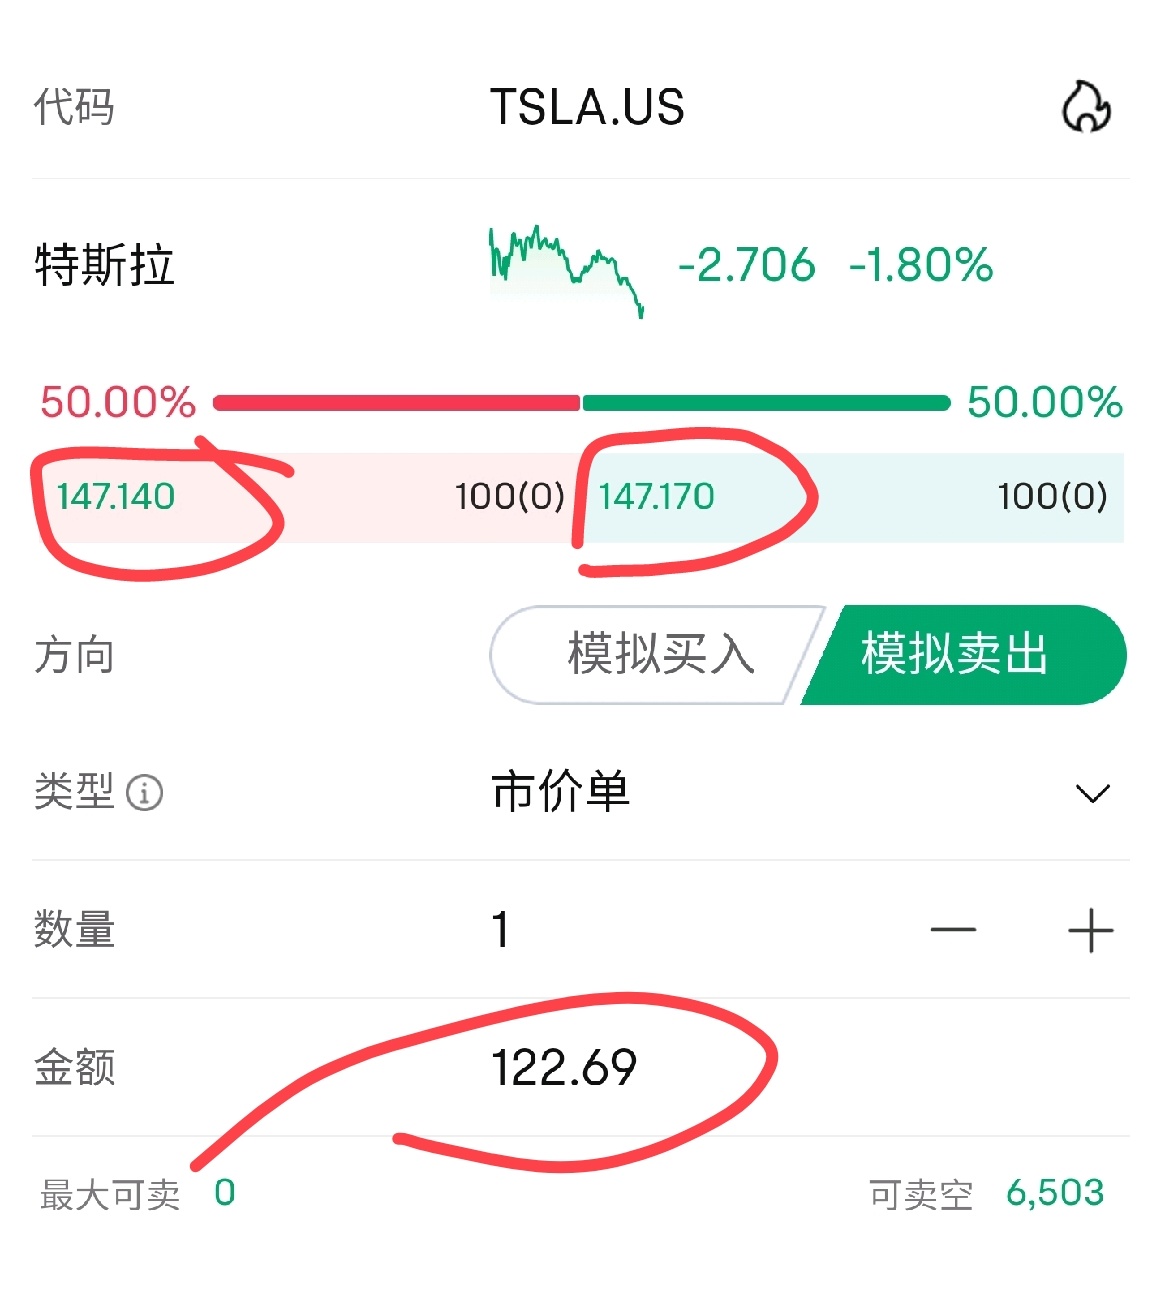 $Tesla (TSLA.US)$ Is there any difference between direct shorting of stocks and bearish options? Figure 1. The stock price at the time was 147.140 and directly ...